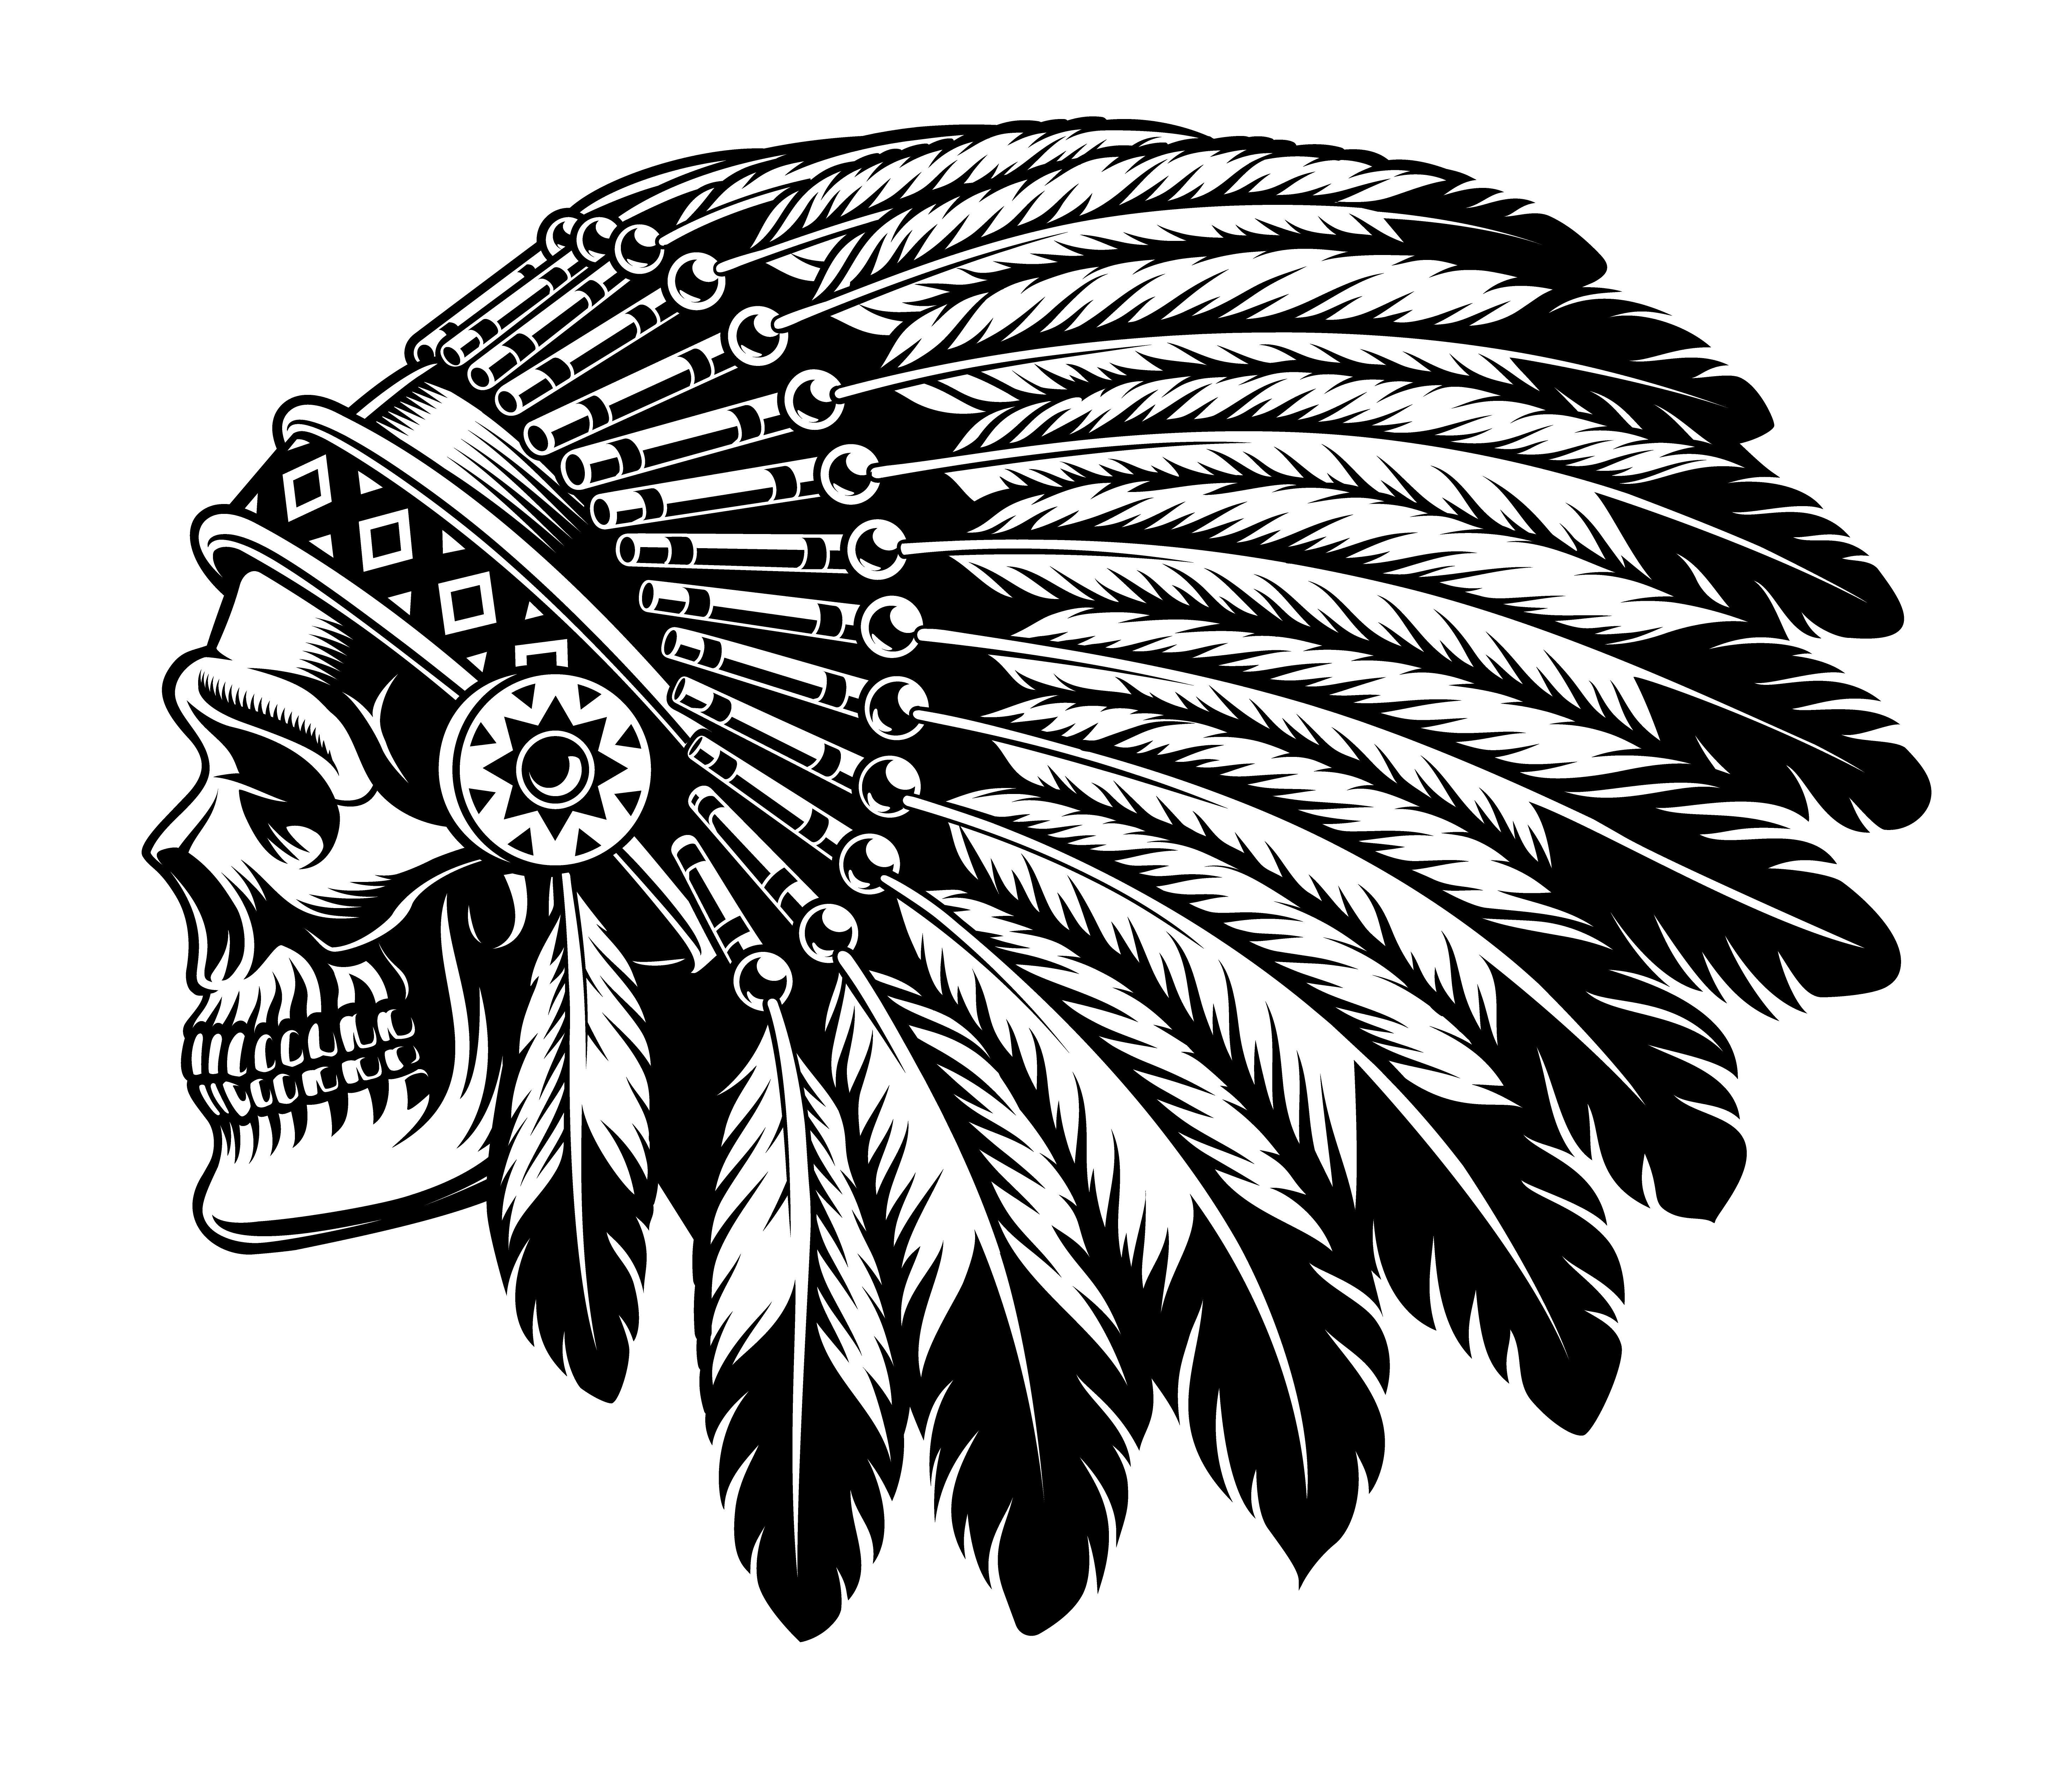 Download Black and white illustration of an Indian skull ...